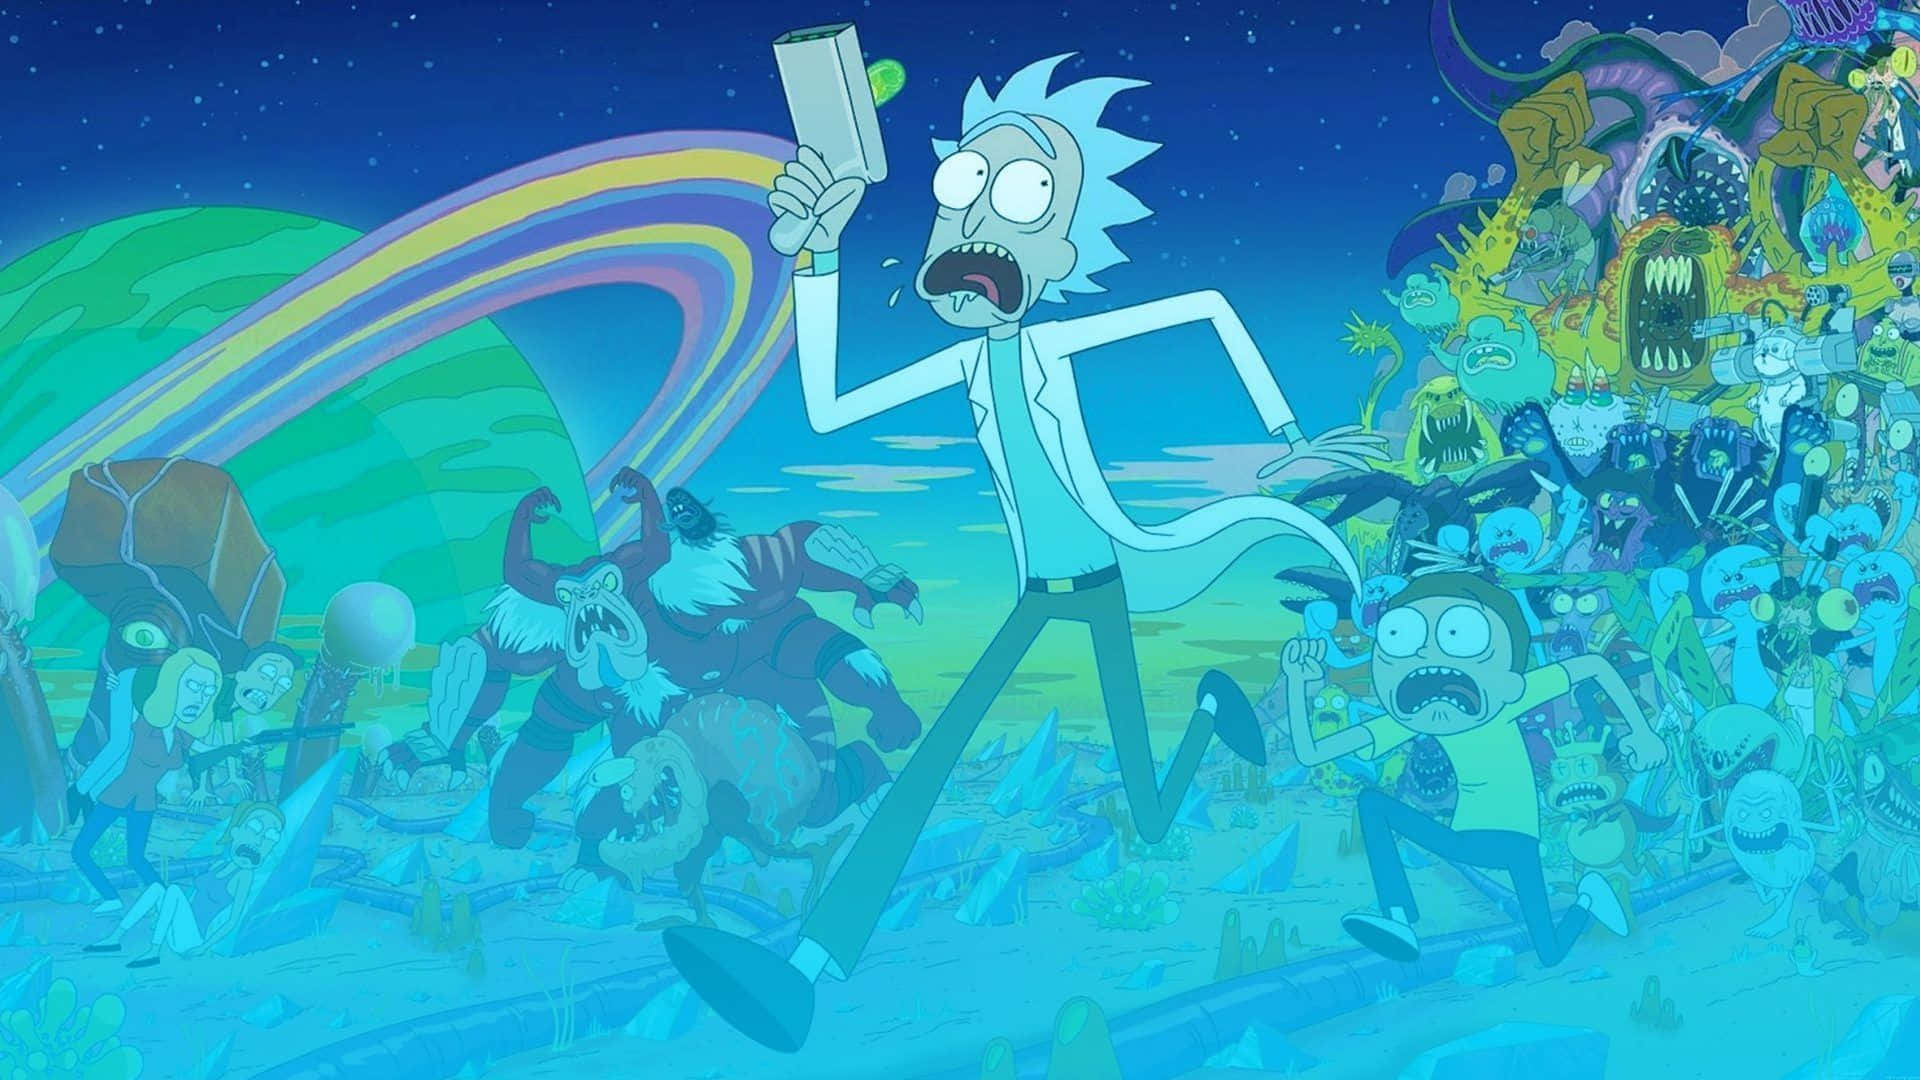 Morty Smith embarks on a sci-fi adventure Wallpaper